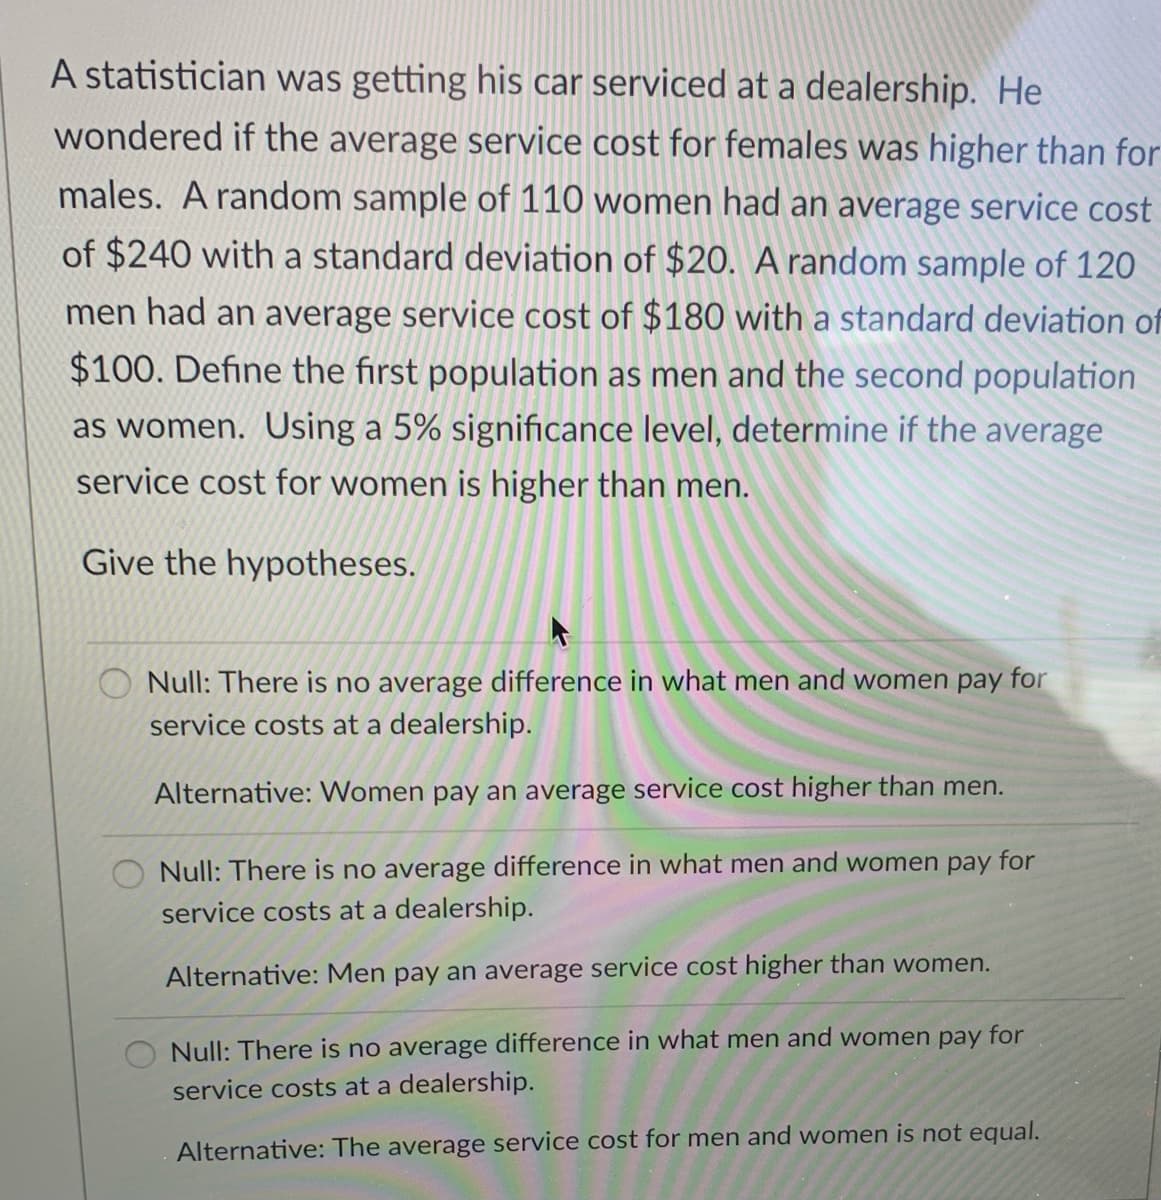 A statistician was getting his car serviced at a dealership. He
wondered if the average service cost for females was higher than for
males. A random sample of 110 women had an average service cost
of $240 with a standard deviation of $20. A random sample of 120
men had an average service cost of $180 with a standard deviation of
$100. Define the first population as men and the second population
as women. Using a 5% significance level, determine if the average
service cost for women is higher than men.
Give the hypotheses.
O Null: There is no average difference in what men and women pay for
service costs at a dealership.
Alternative: Women pay an average service cost higher than men.
Null: There is no average difference in what men and women pay for
service costs at a dealership.
Alternative: Men pay an average service cost higher than women.
O Null: There is no average difference in what men and women pay for
service costs at a dealership.
Alternative: The average service cost for men and women is not equal.
